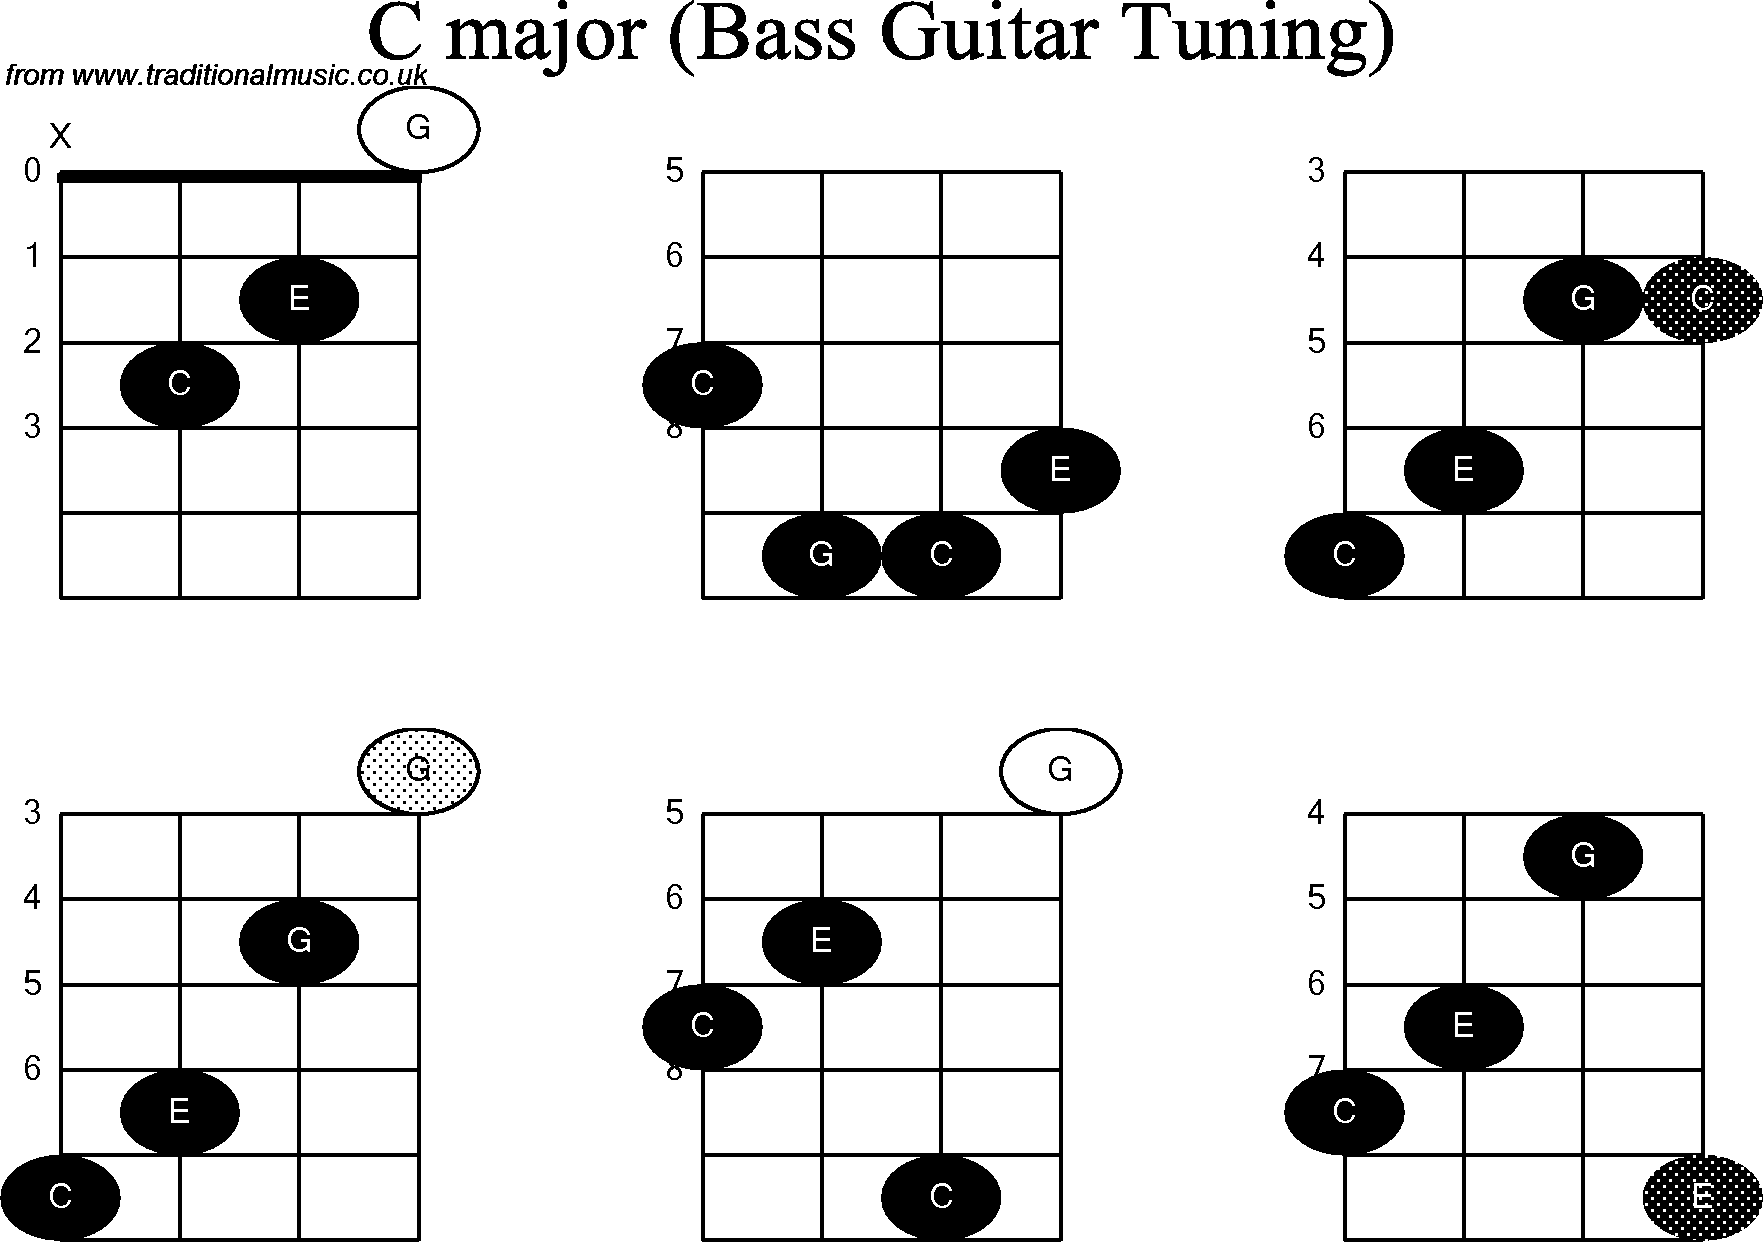 Bass Guitar chord charts for: C